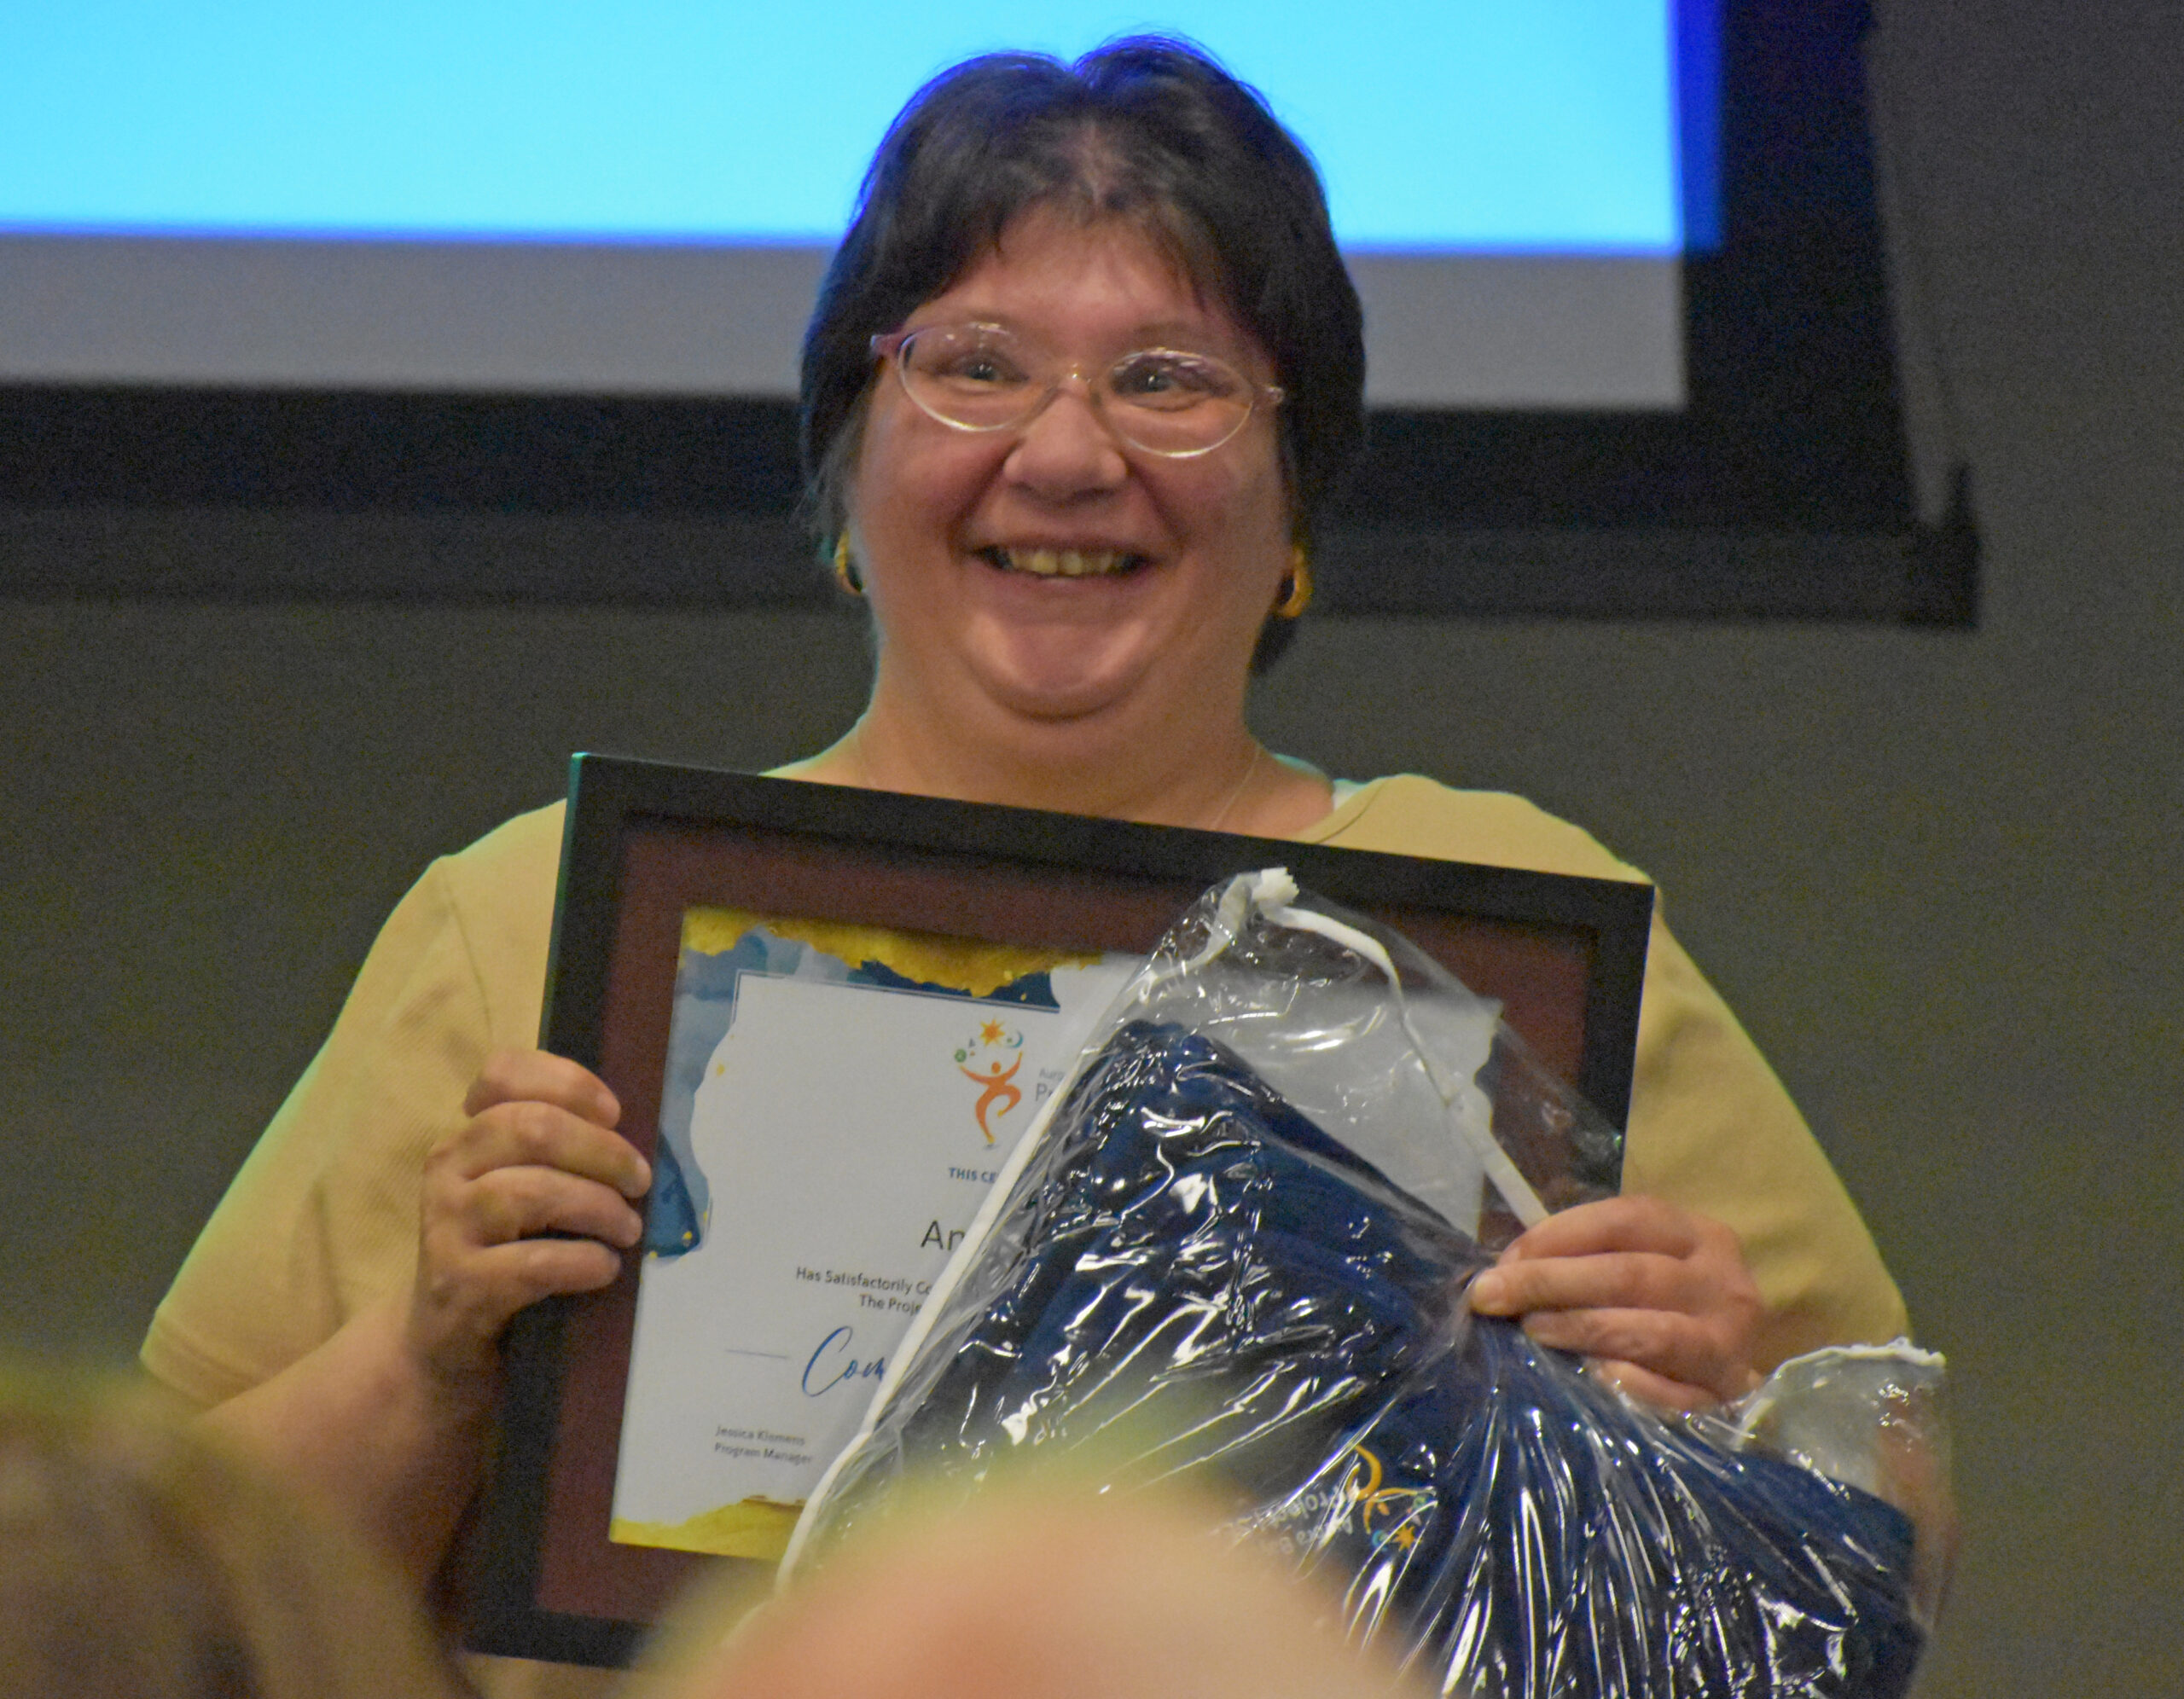 Angela Crowder smiles as she holds her Project SEARCH certificate at a graduation ceremony.